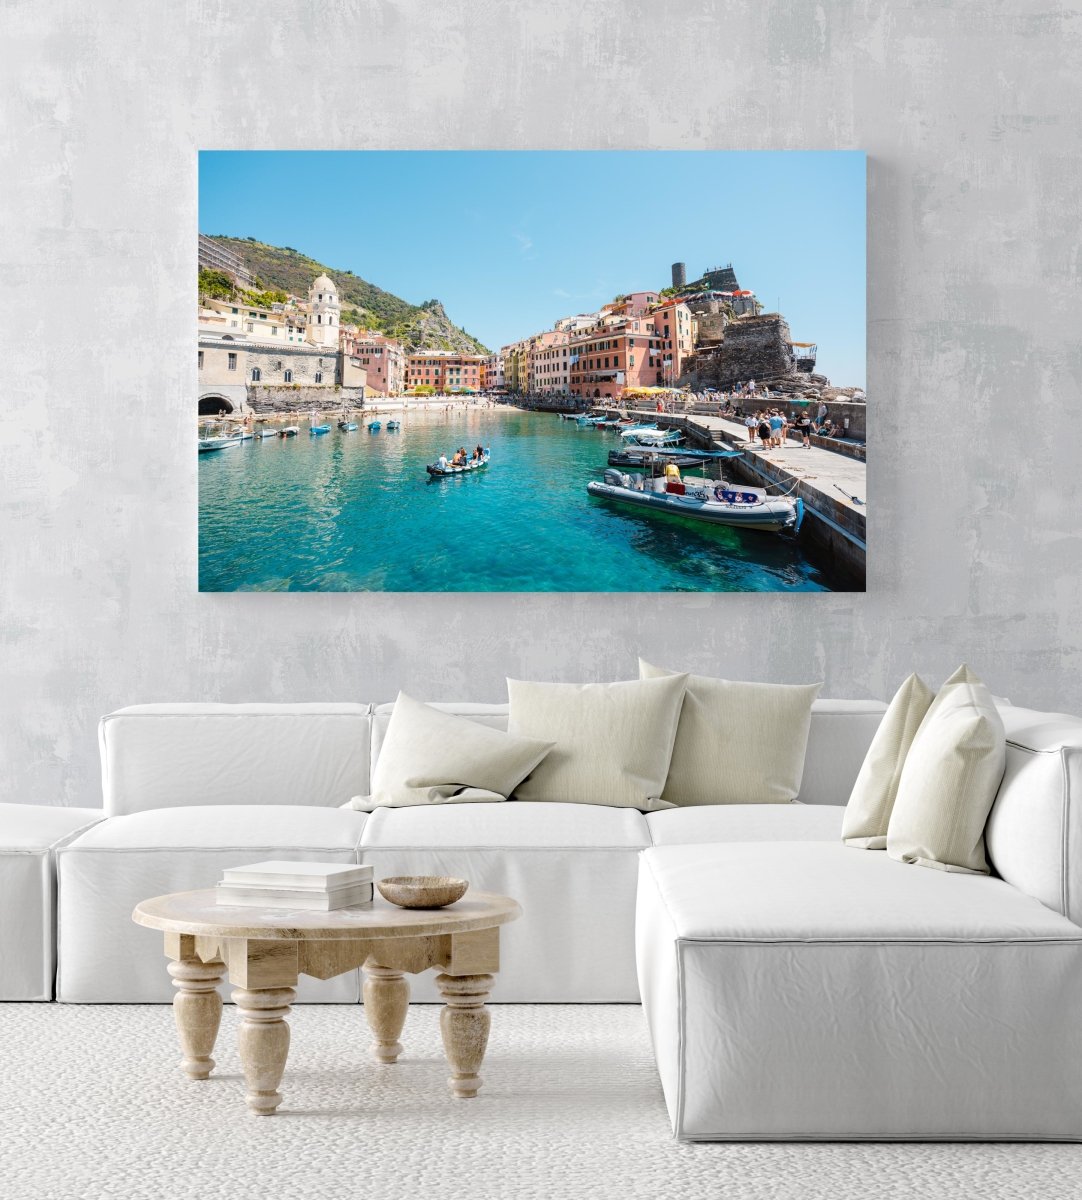 People on boat in blue water in colorful Vernazza of Cinque Terre in an acrylic/perspex frame